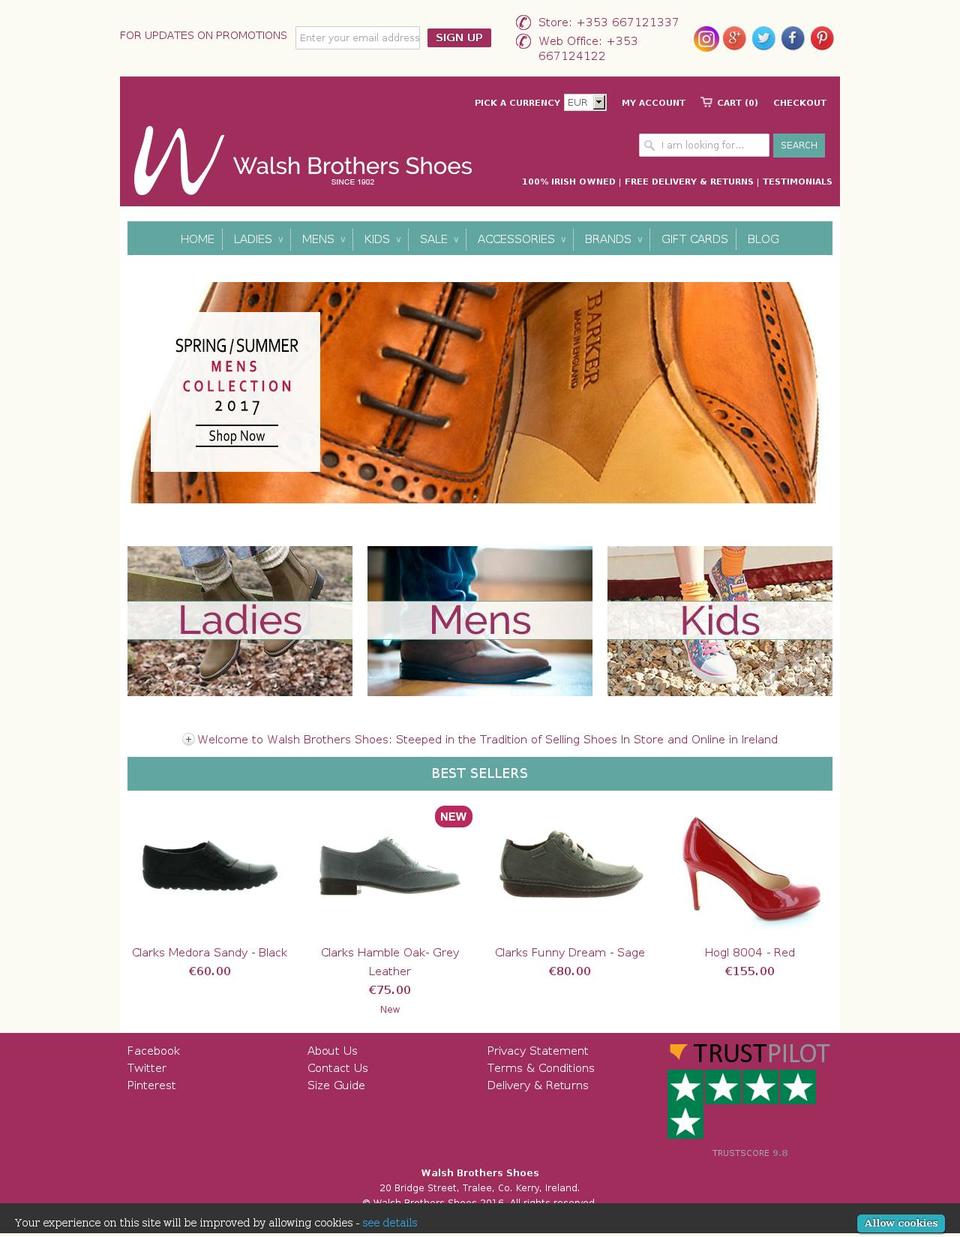 walshbrothersshoes.ie shopify website screenshot